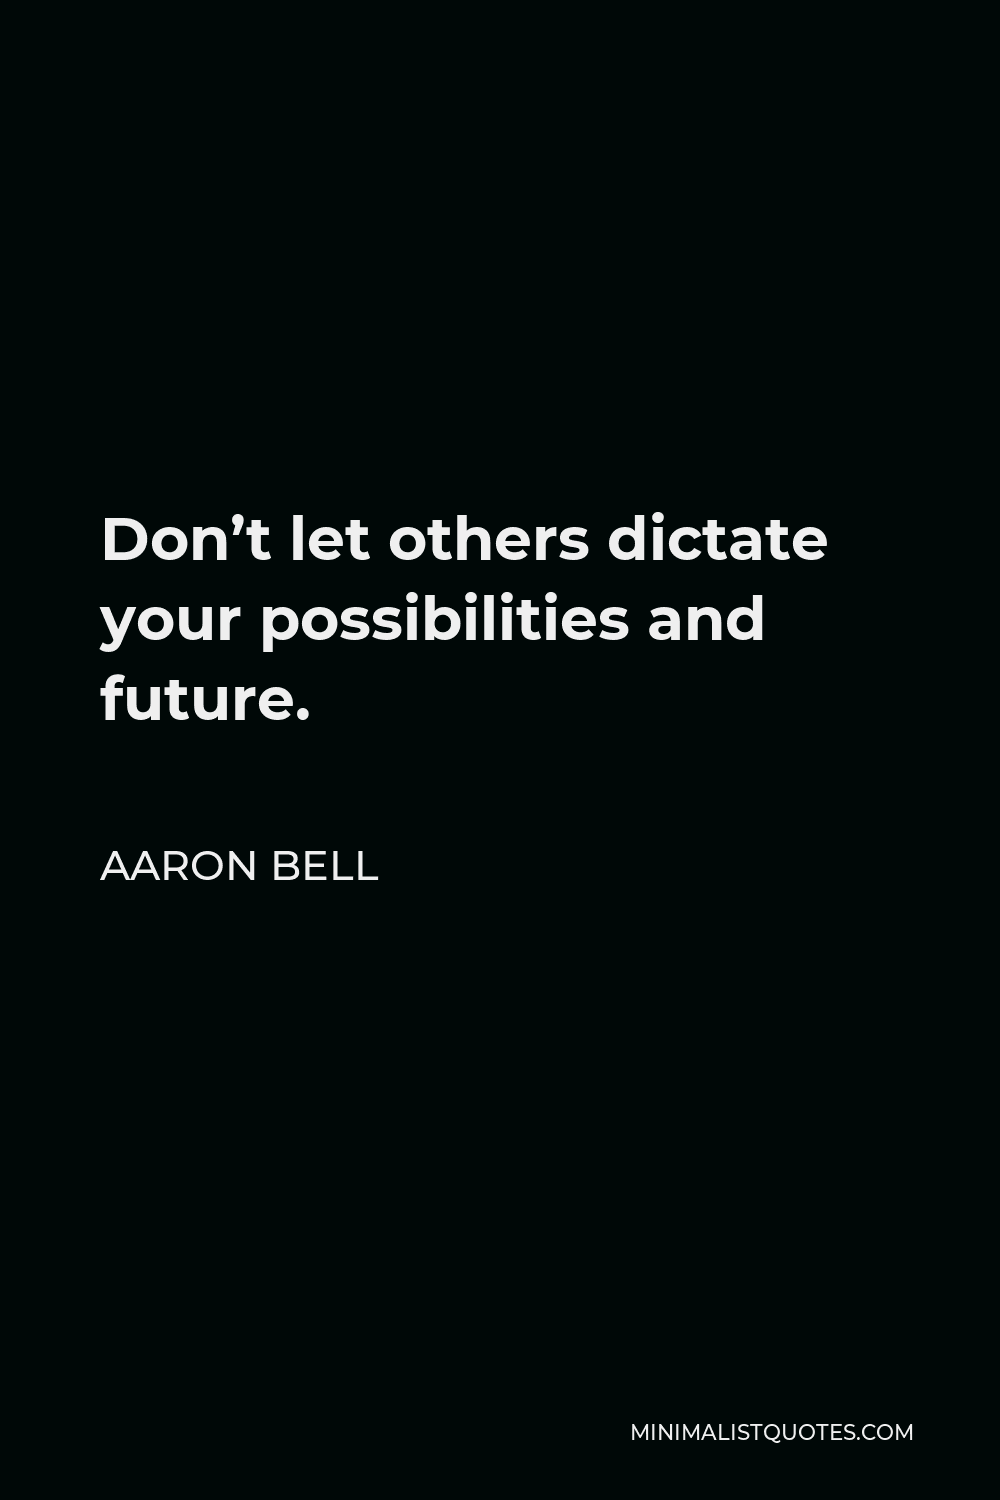 Aaron Bell Quote - Don’t let others dictate your possibilities and future.